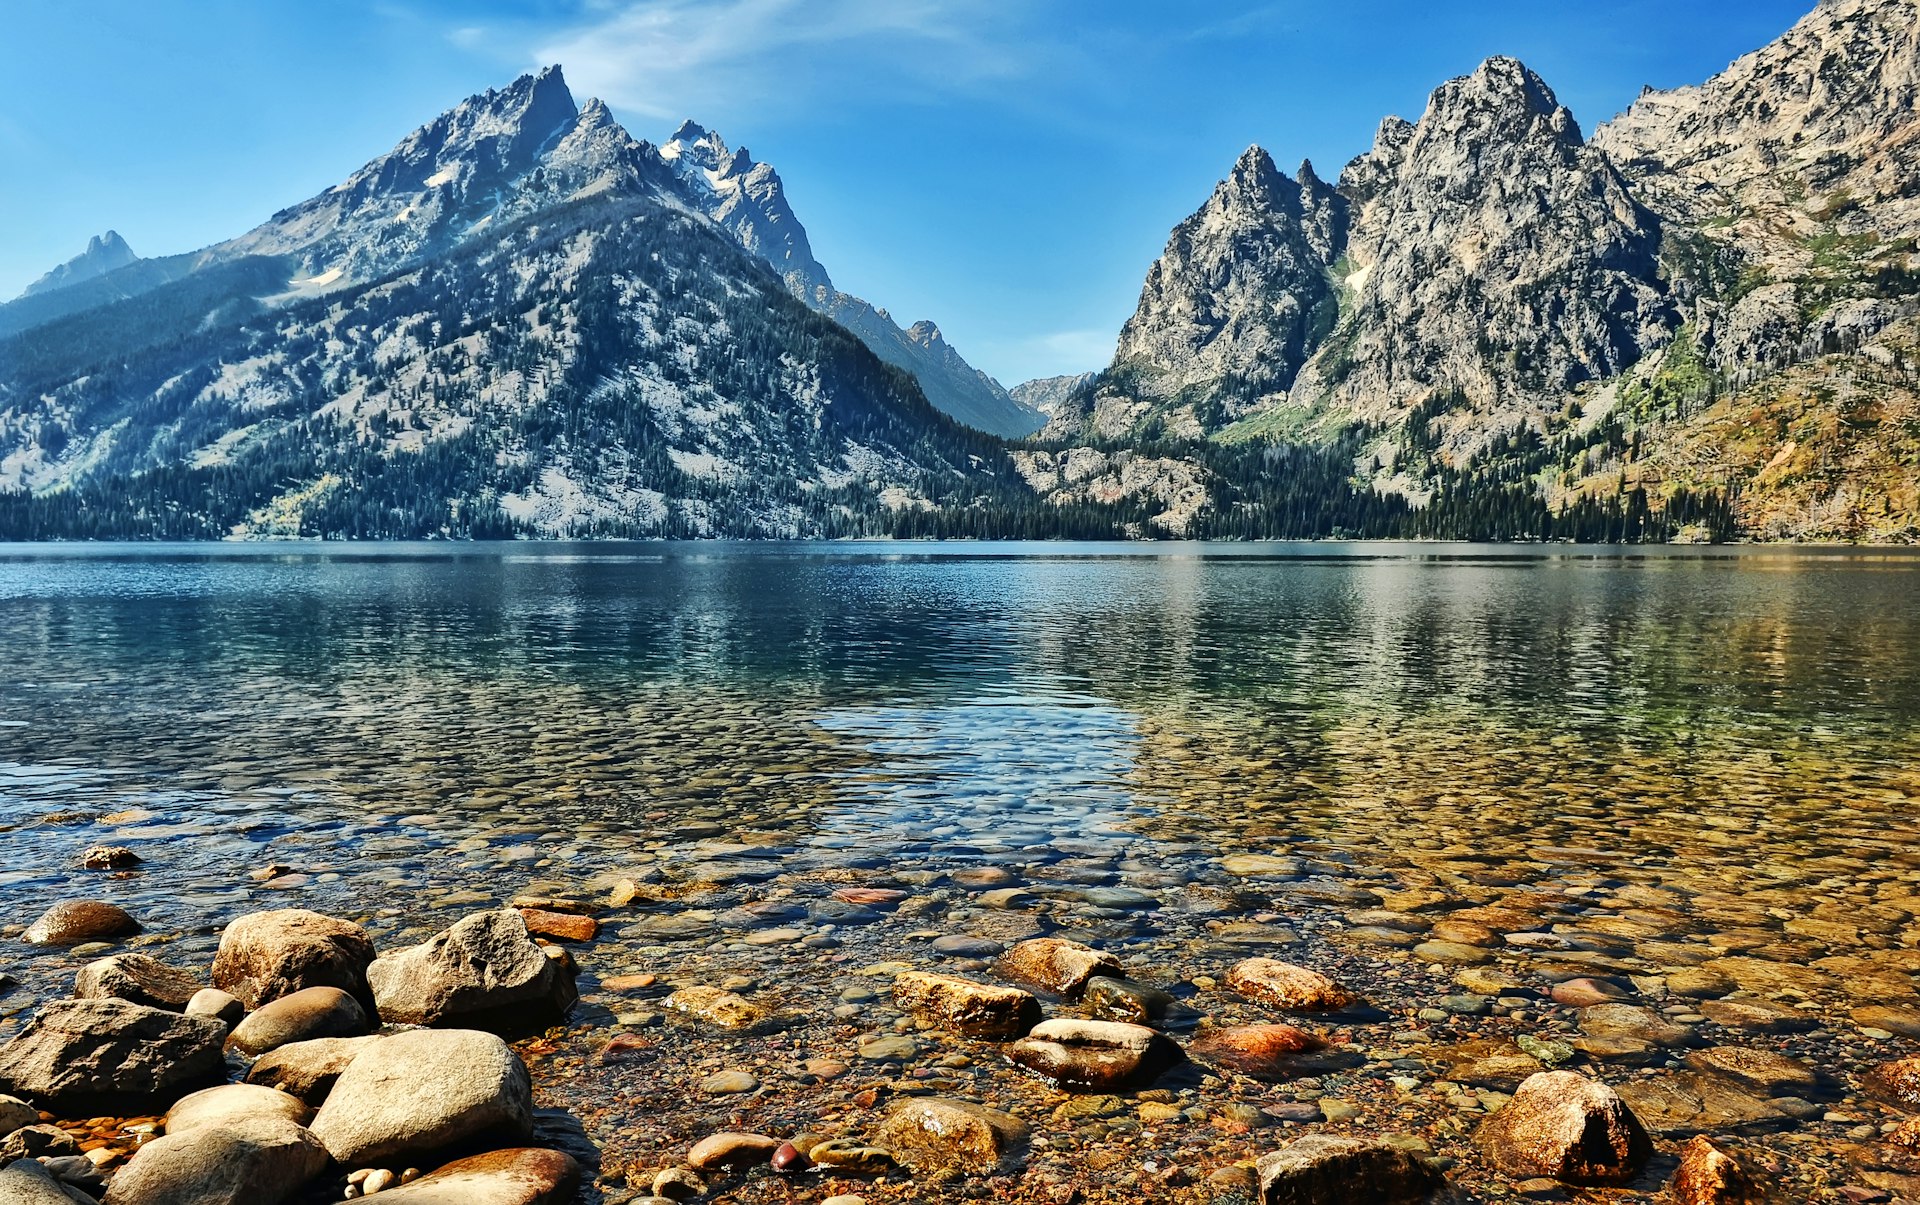 The ragged peaks of Grand Teton National Park rise steeply over Jenny Lake. The massif on the left is deep blue in the shadows and where trees cover its flanks, while the bright sunshine hi-lights its light grey rocky face. On the right, another peak is more brightly lit, appearing a light tan color with thin streaks of bright green vegetation. The lake itself is smooth and calm, a mixture of blues and greens, while in the extreme foreground the large, flat, stones on the shoreline are rust colored and grey